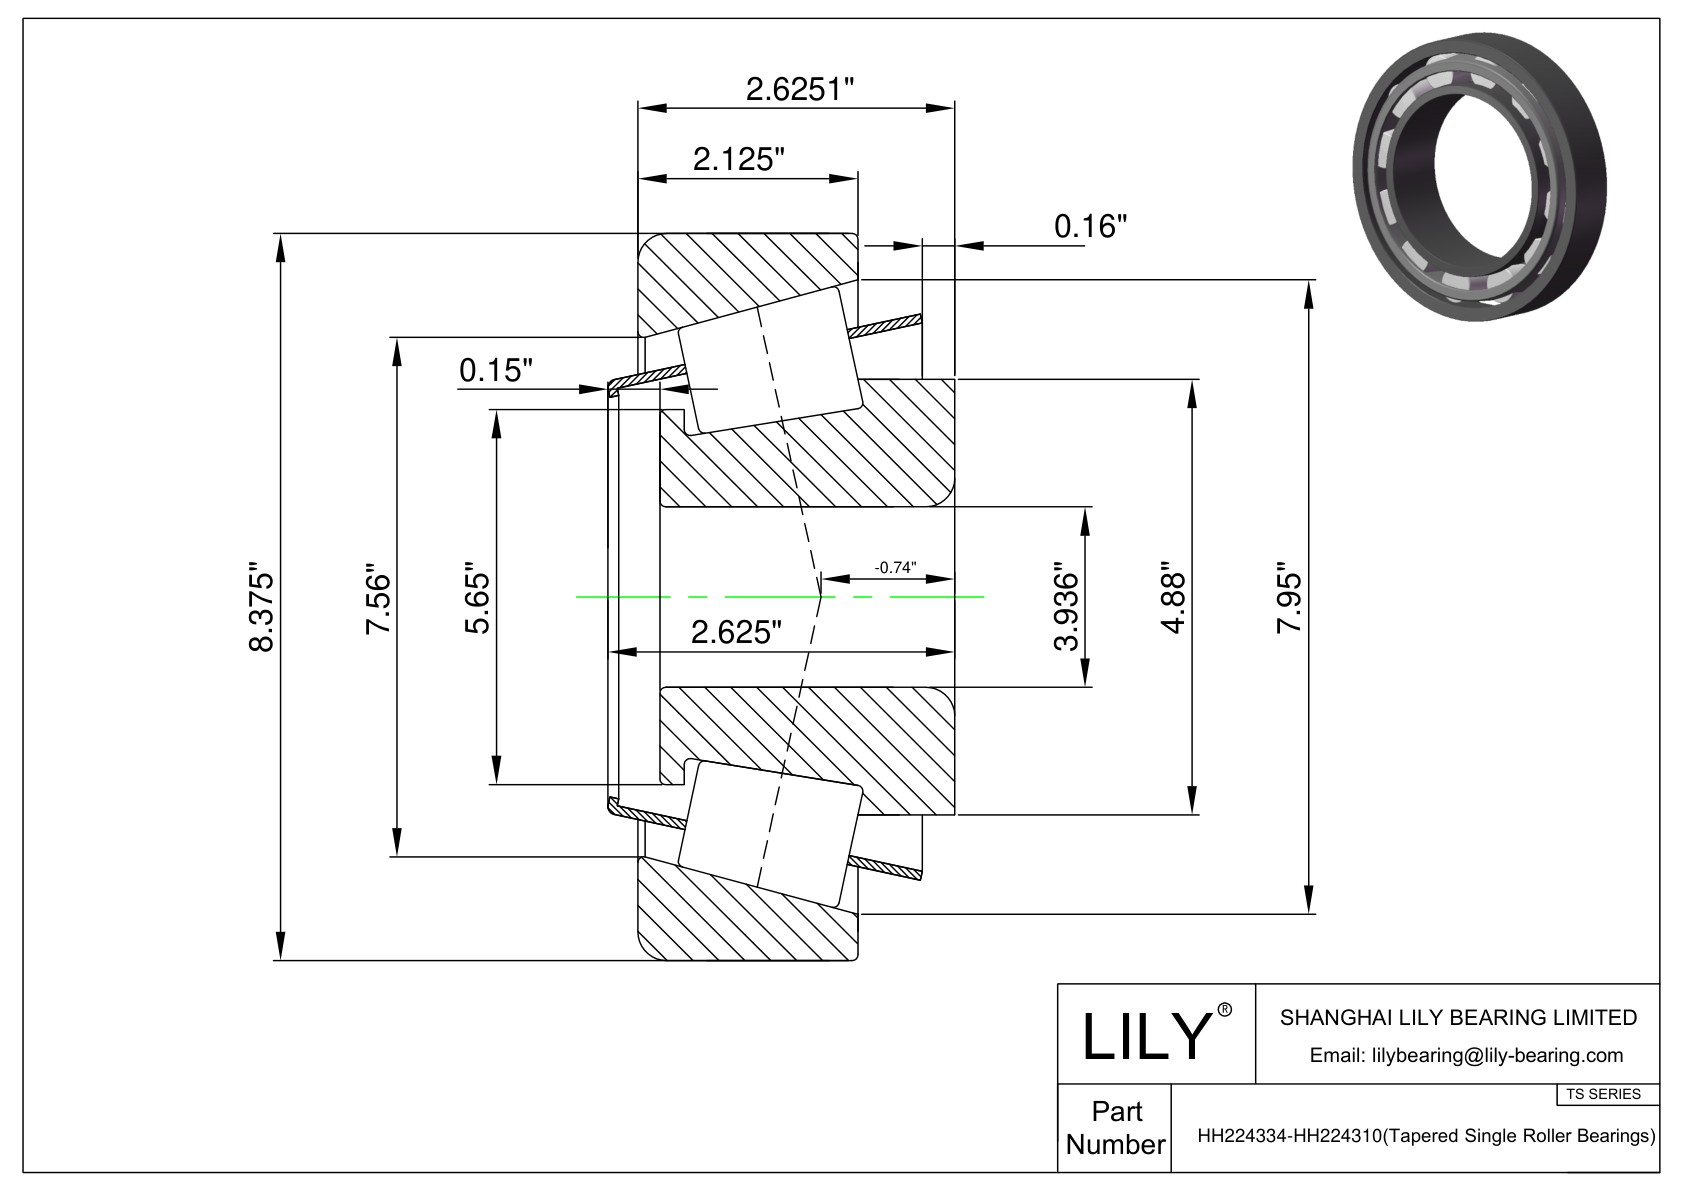 HH224334-HH224310 TS (Tapered Single Roller Bearings) (Imperial) cad drawing